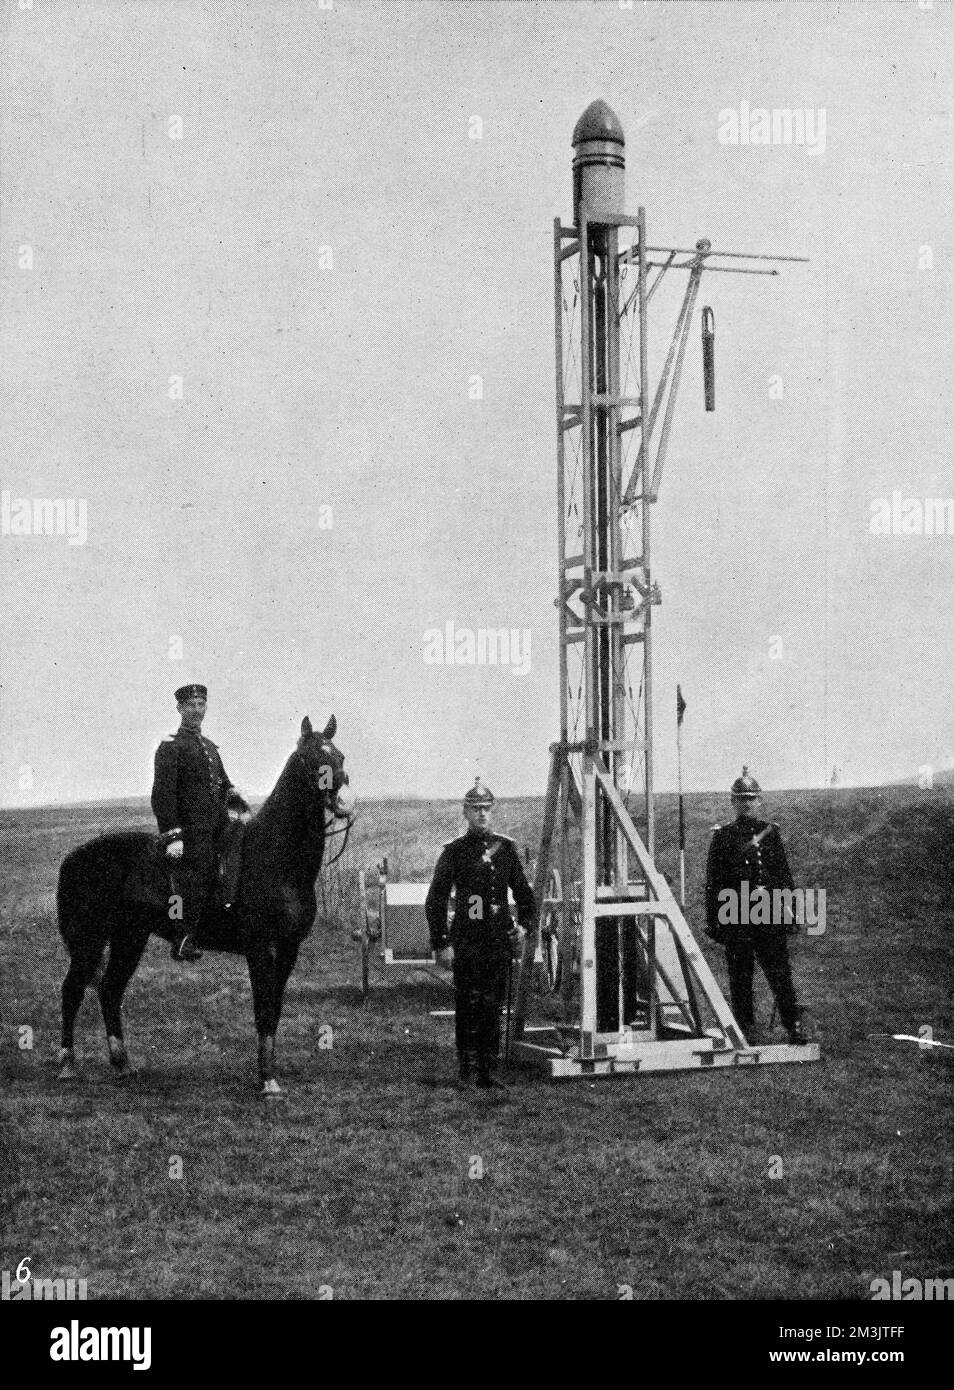 A rocket used to propel a camera to 2600 feet to capture an ariel image. The soldiers are pictured here ready to fire the rocket from its framework. When the camera reached its highest point there is a short pause before the parachute opens to position the camera and an exposure is made.  1912 Stock Photo